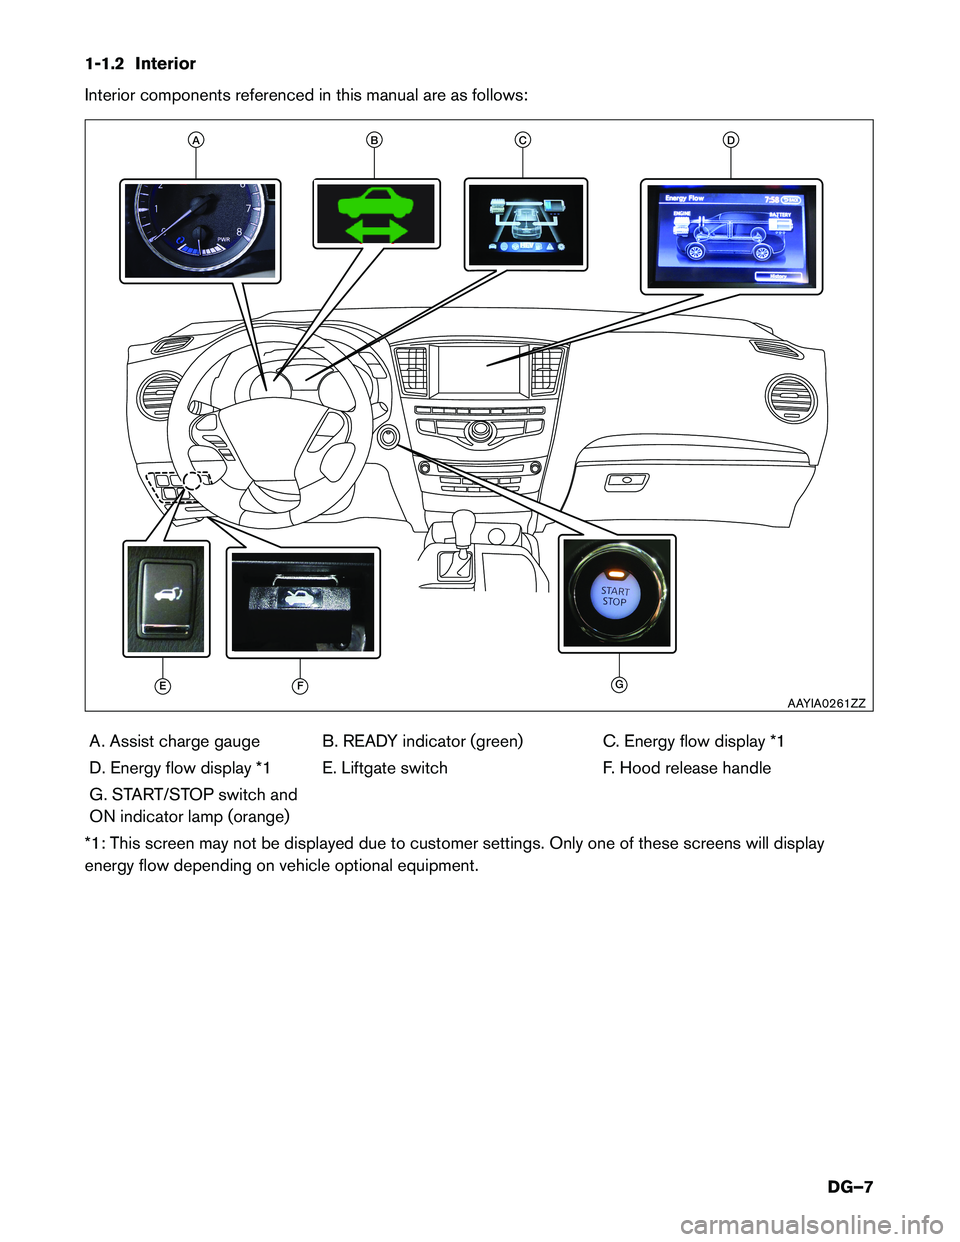 INFINITI QX60 HYBRID 2014  Dismantling Guide 1-1.2 Interior 
Interior components referenced in this manual are as follows:A. Assist charge gauge B. READY indicator (green) C. Energy flow display *1 
D. Energy flow display *1 E. Liftgate switch F